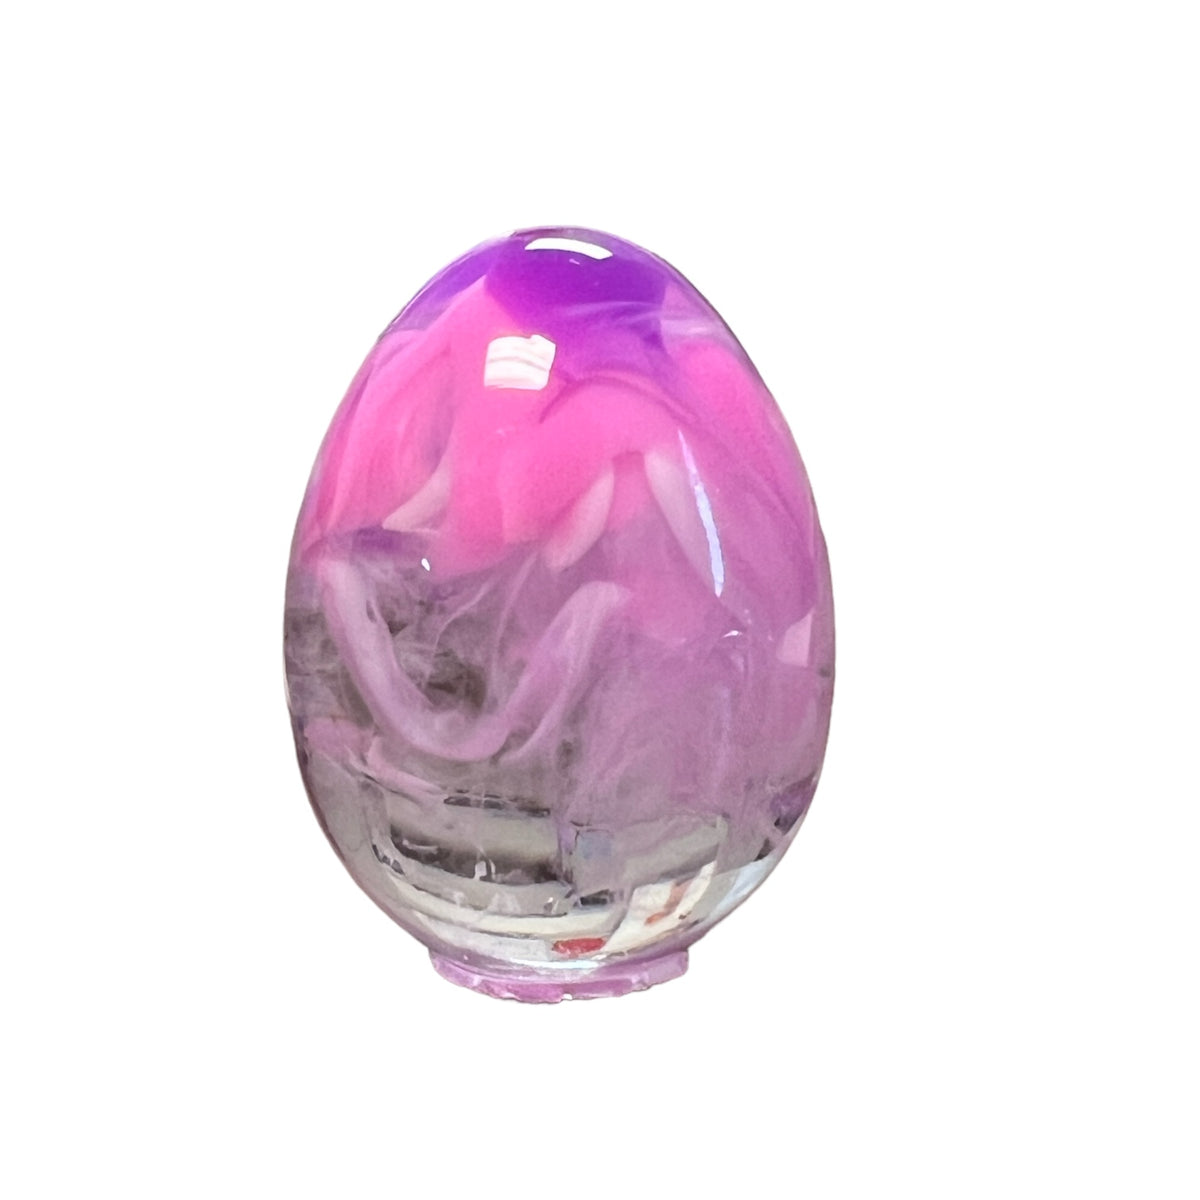 Egg Oval Shape Clear Silicone Mold, Egg Silicone Mold (6 Cavity), Easter  Egg Making, Clear Mold for UV Resin, Epoxy Resin Craft Supplies